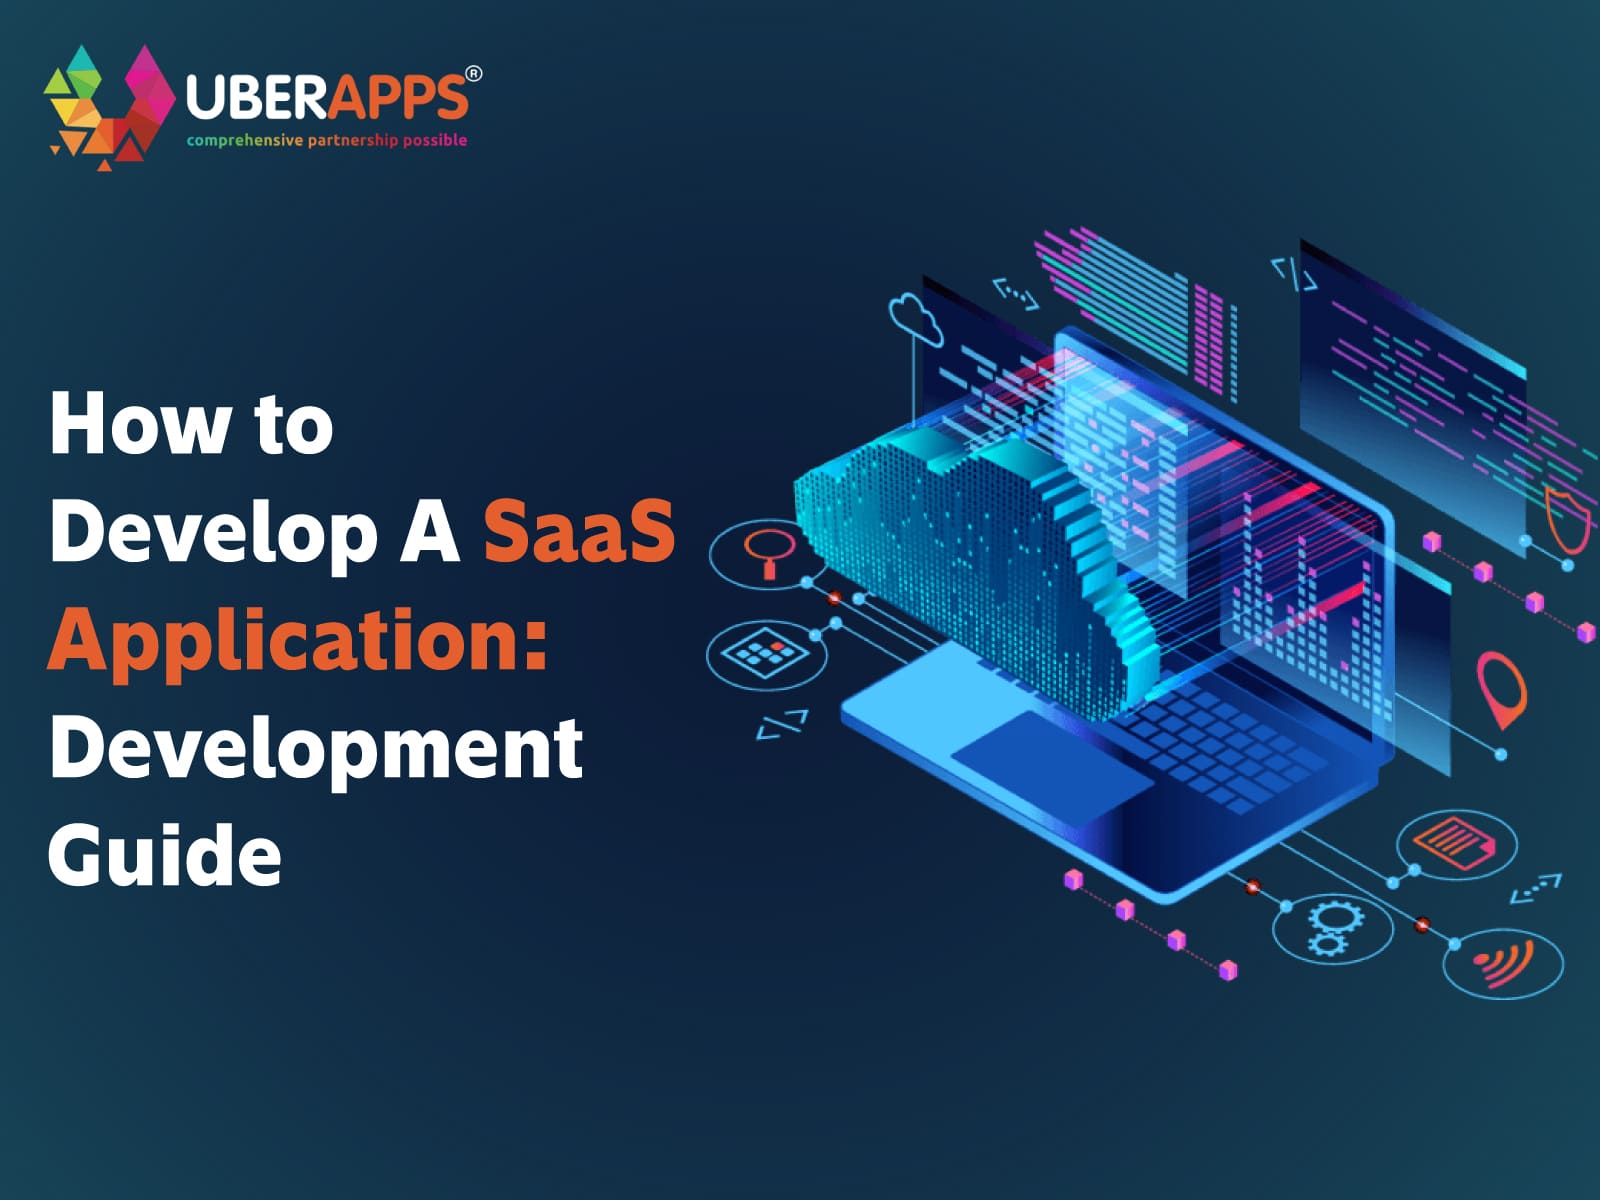 How To Develop A SaaS Application